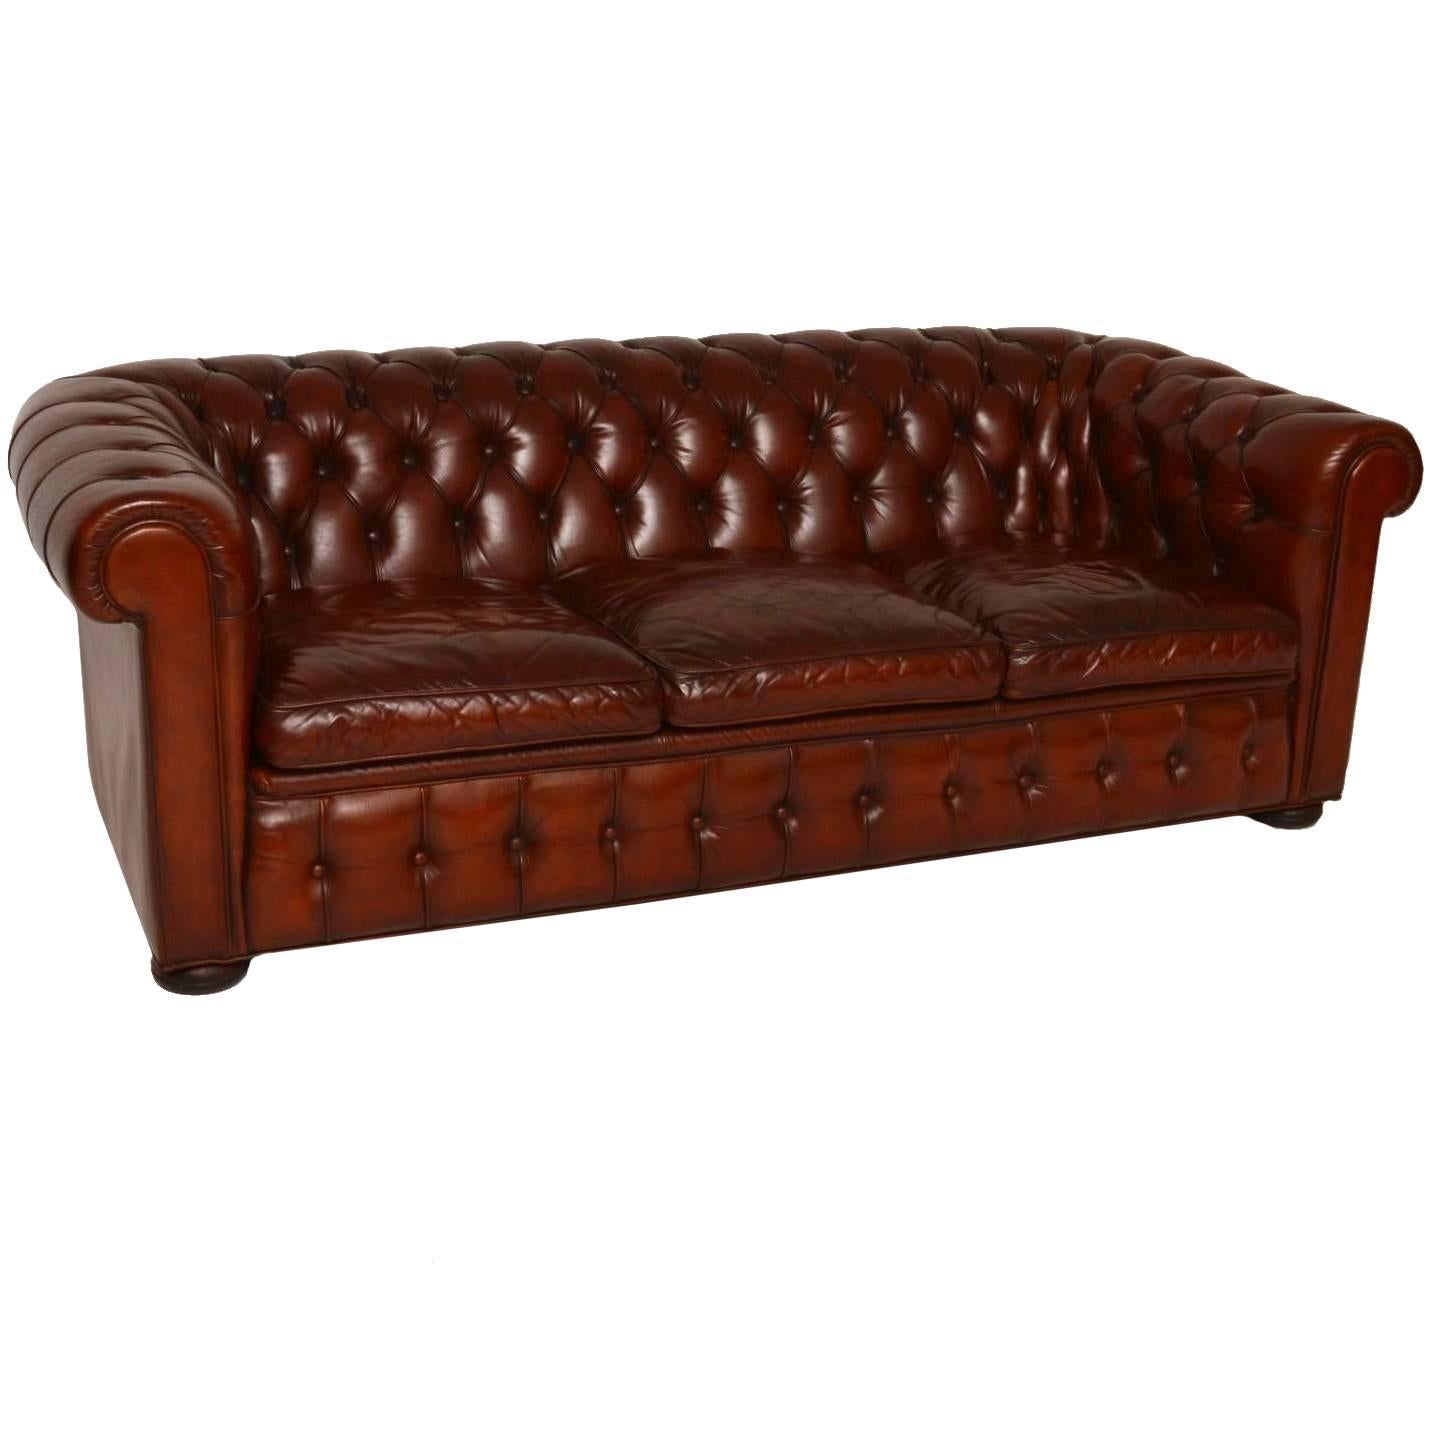 Antique Leather Three-Seat Chesterfield Sofa